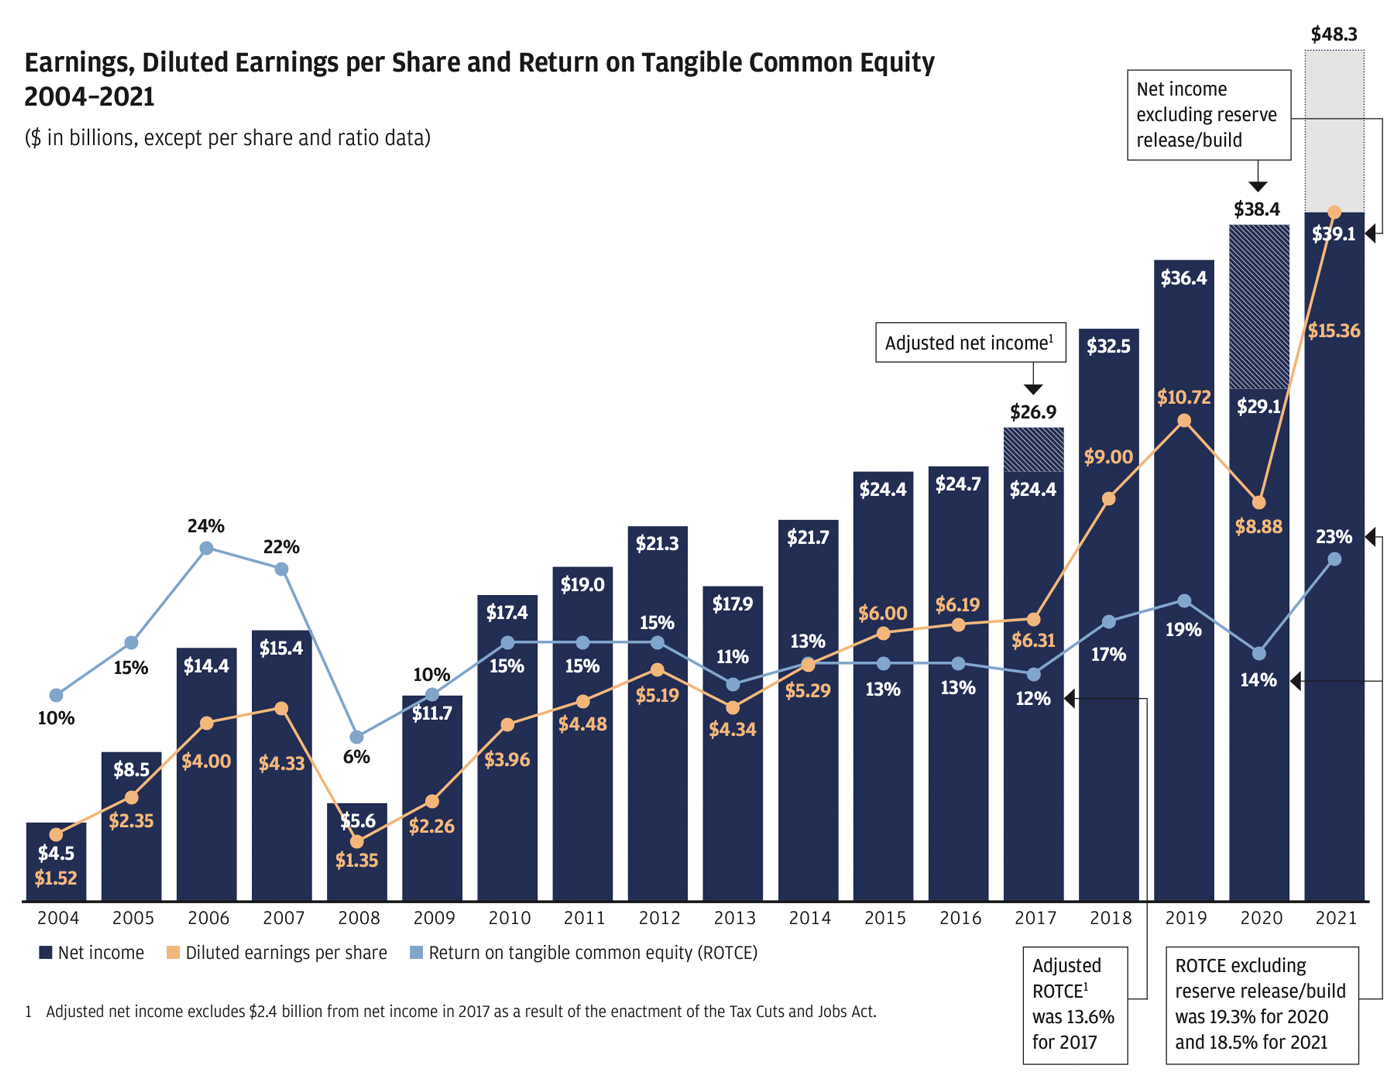 Bar graph showing 2004 to 2021 trend of net income, with overlayed lines for diluted earnings per share and return on tangible common equity